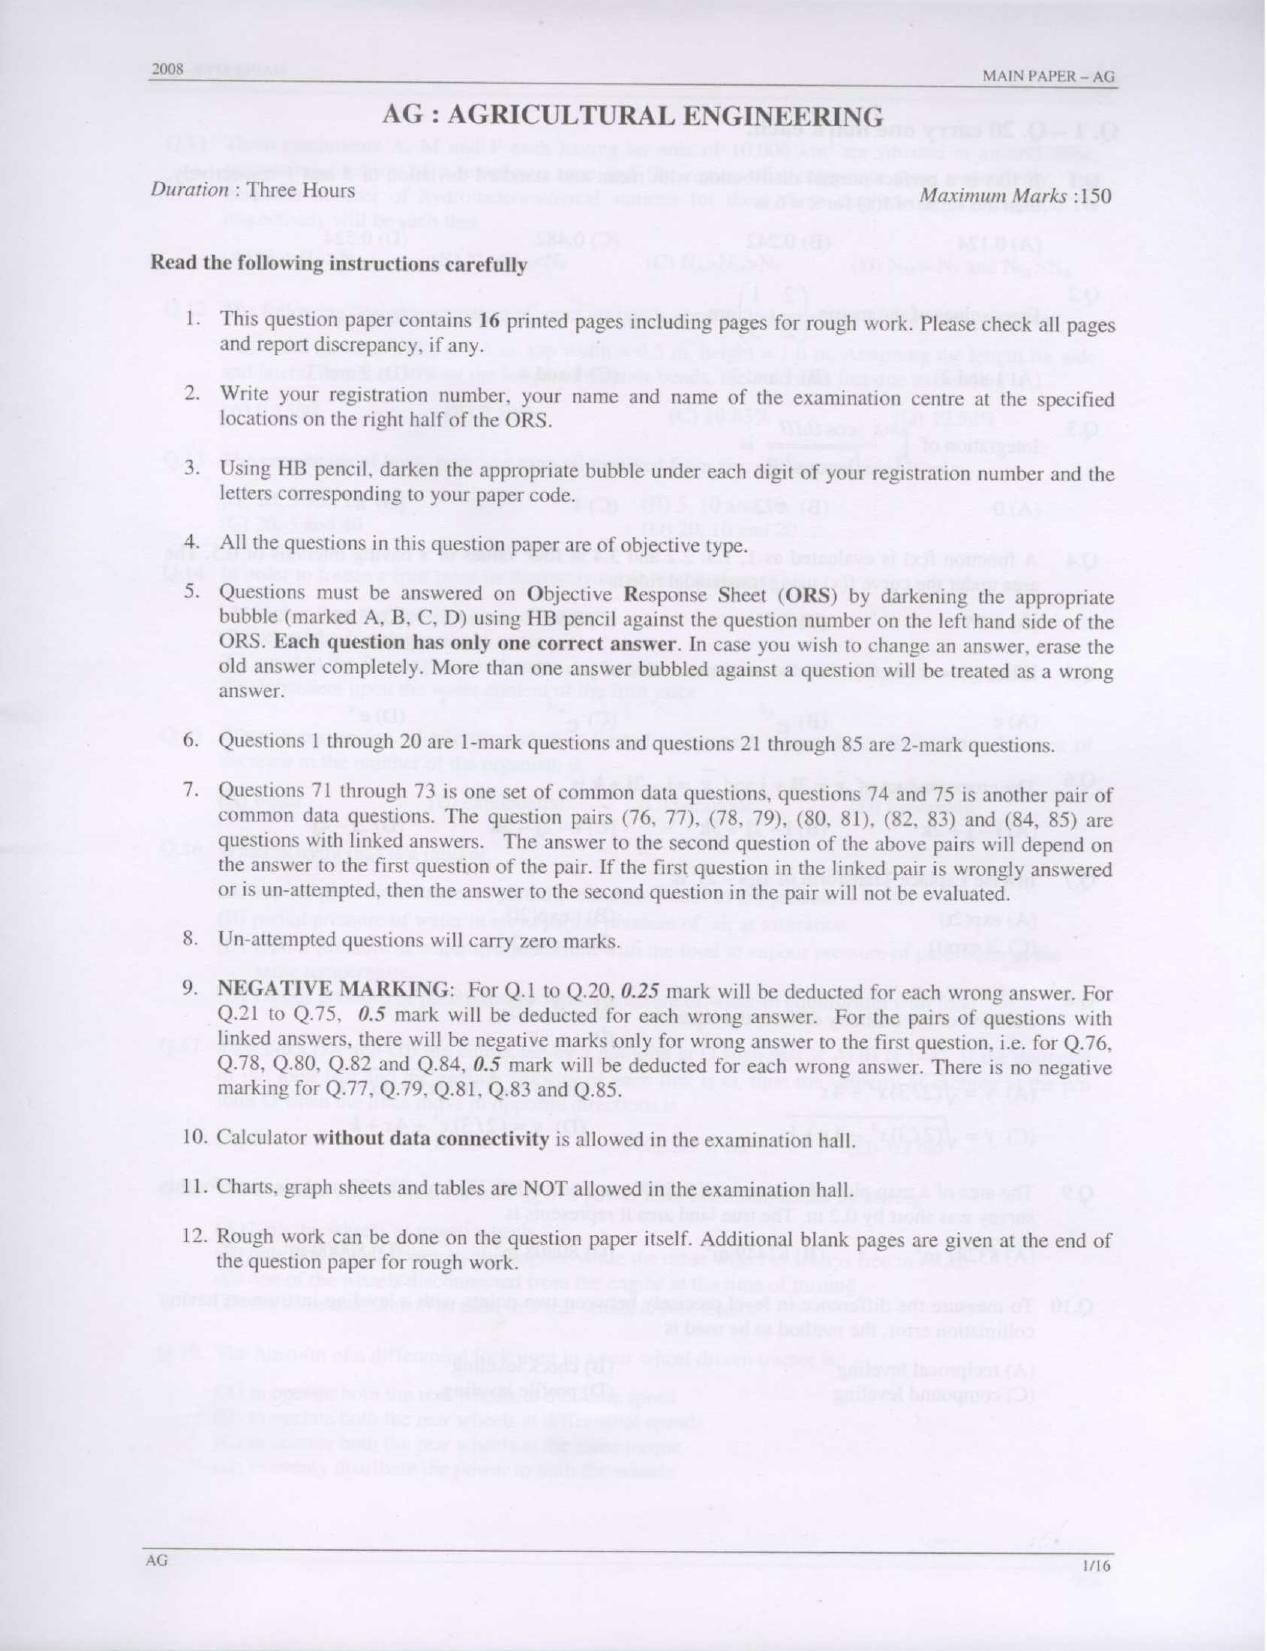 GATE 2008 Agricultural Engineering (AG) Question Paper with Answer Key - Page 1